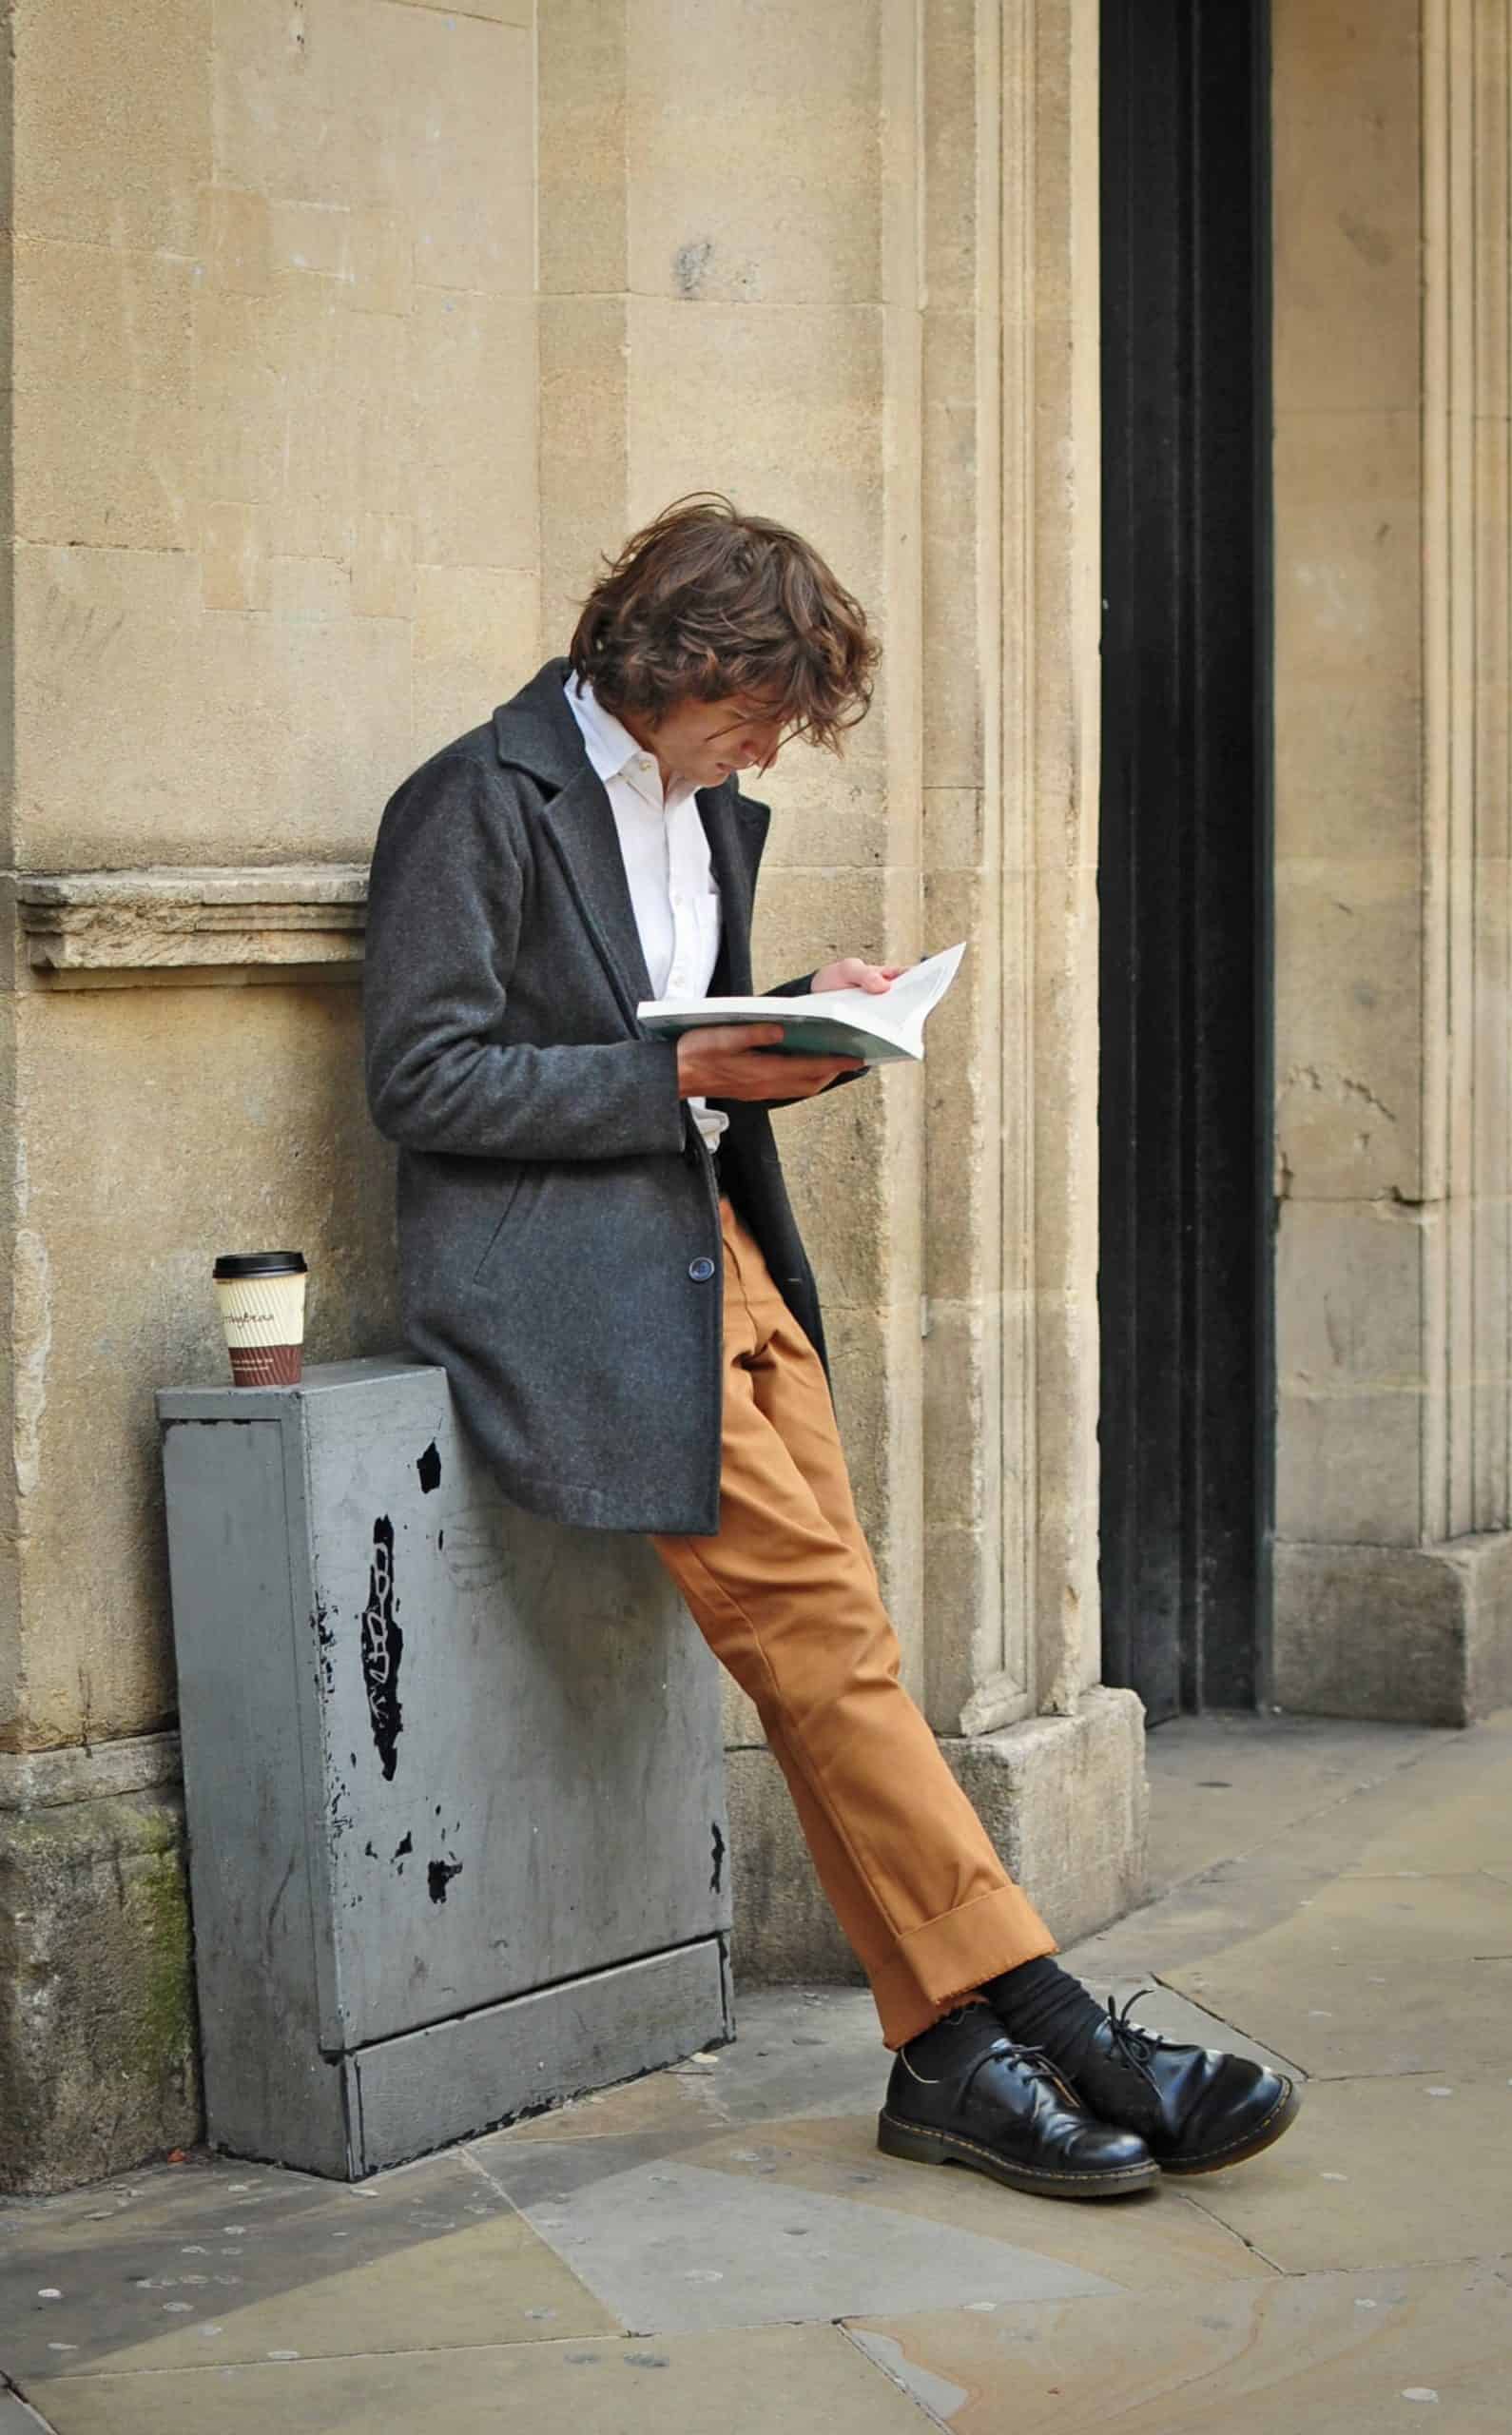 A man reading a book in hopes of developing a growth mindset